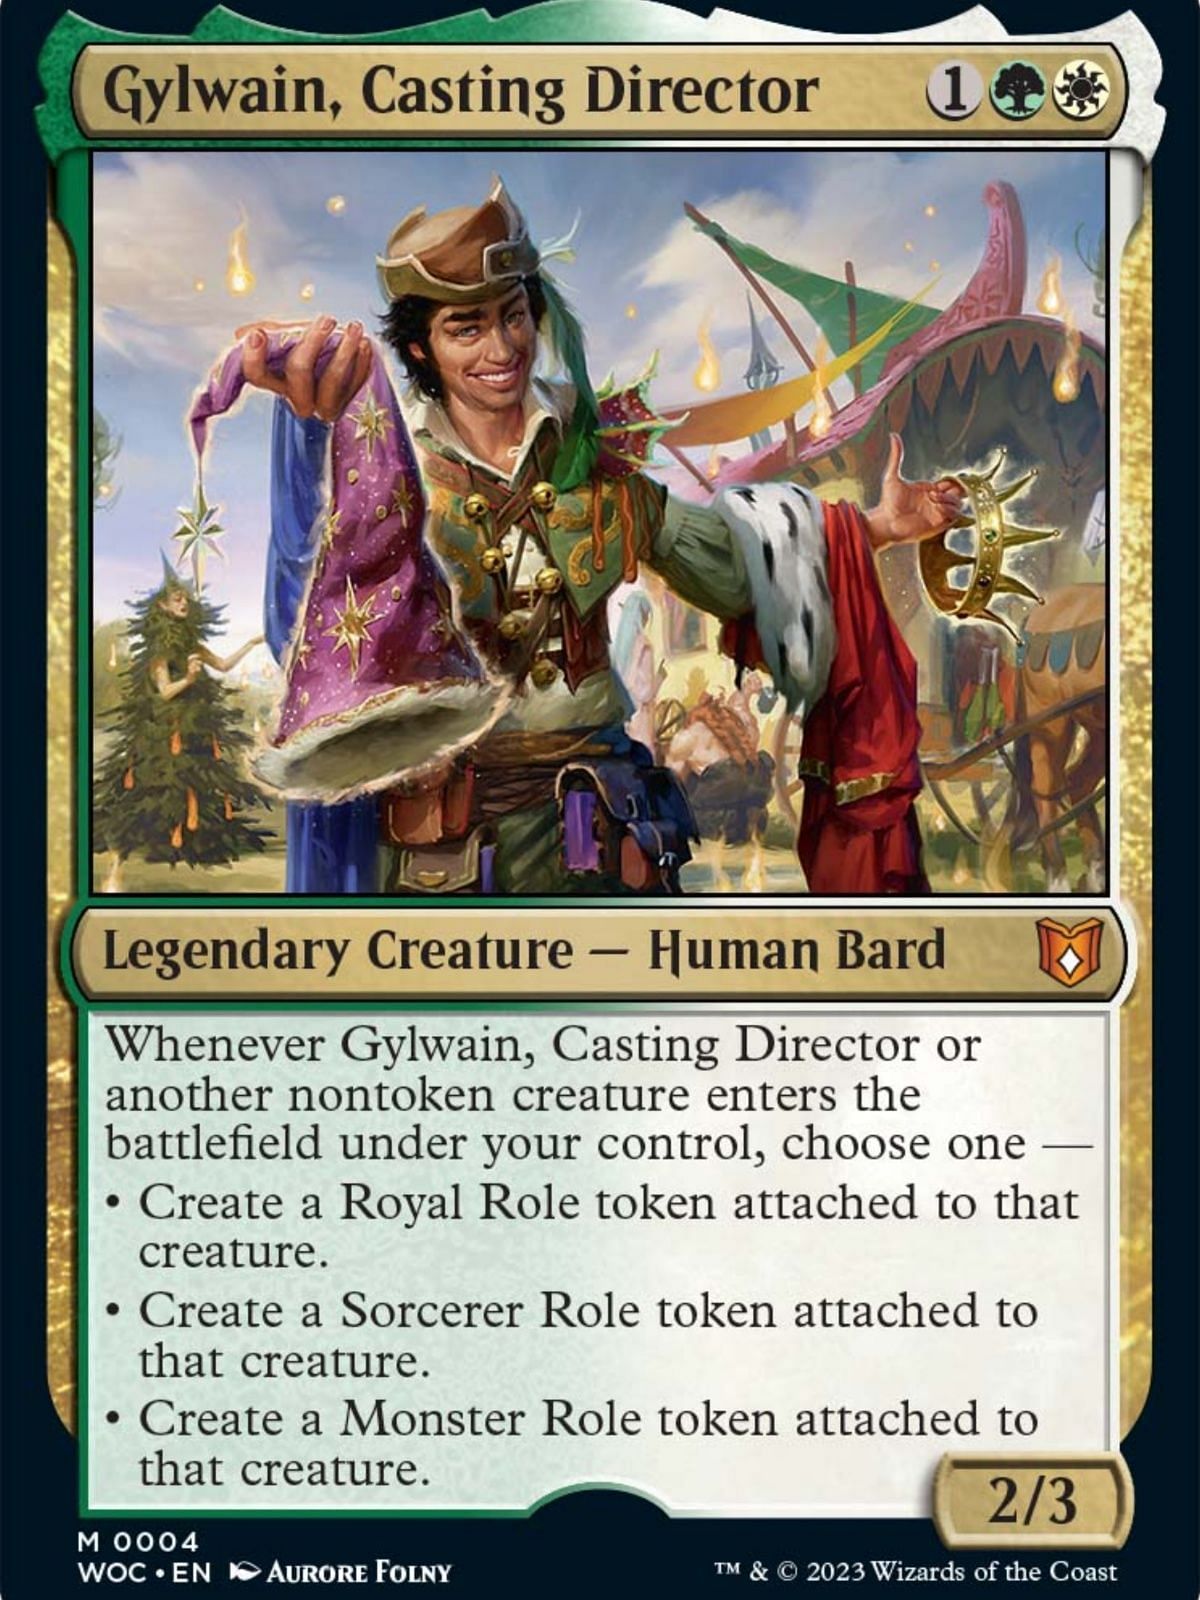 Gylwain, Casting Director in MTG (Image via Wizards of the Coast)